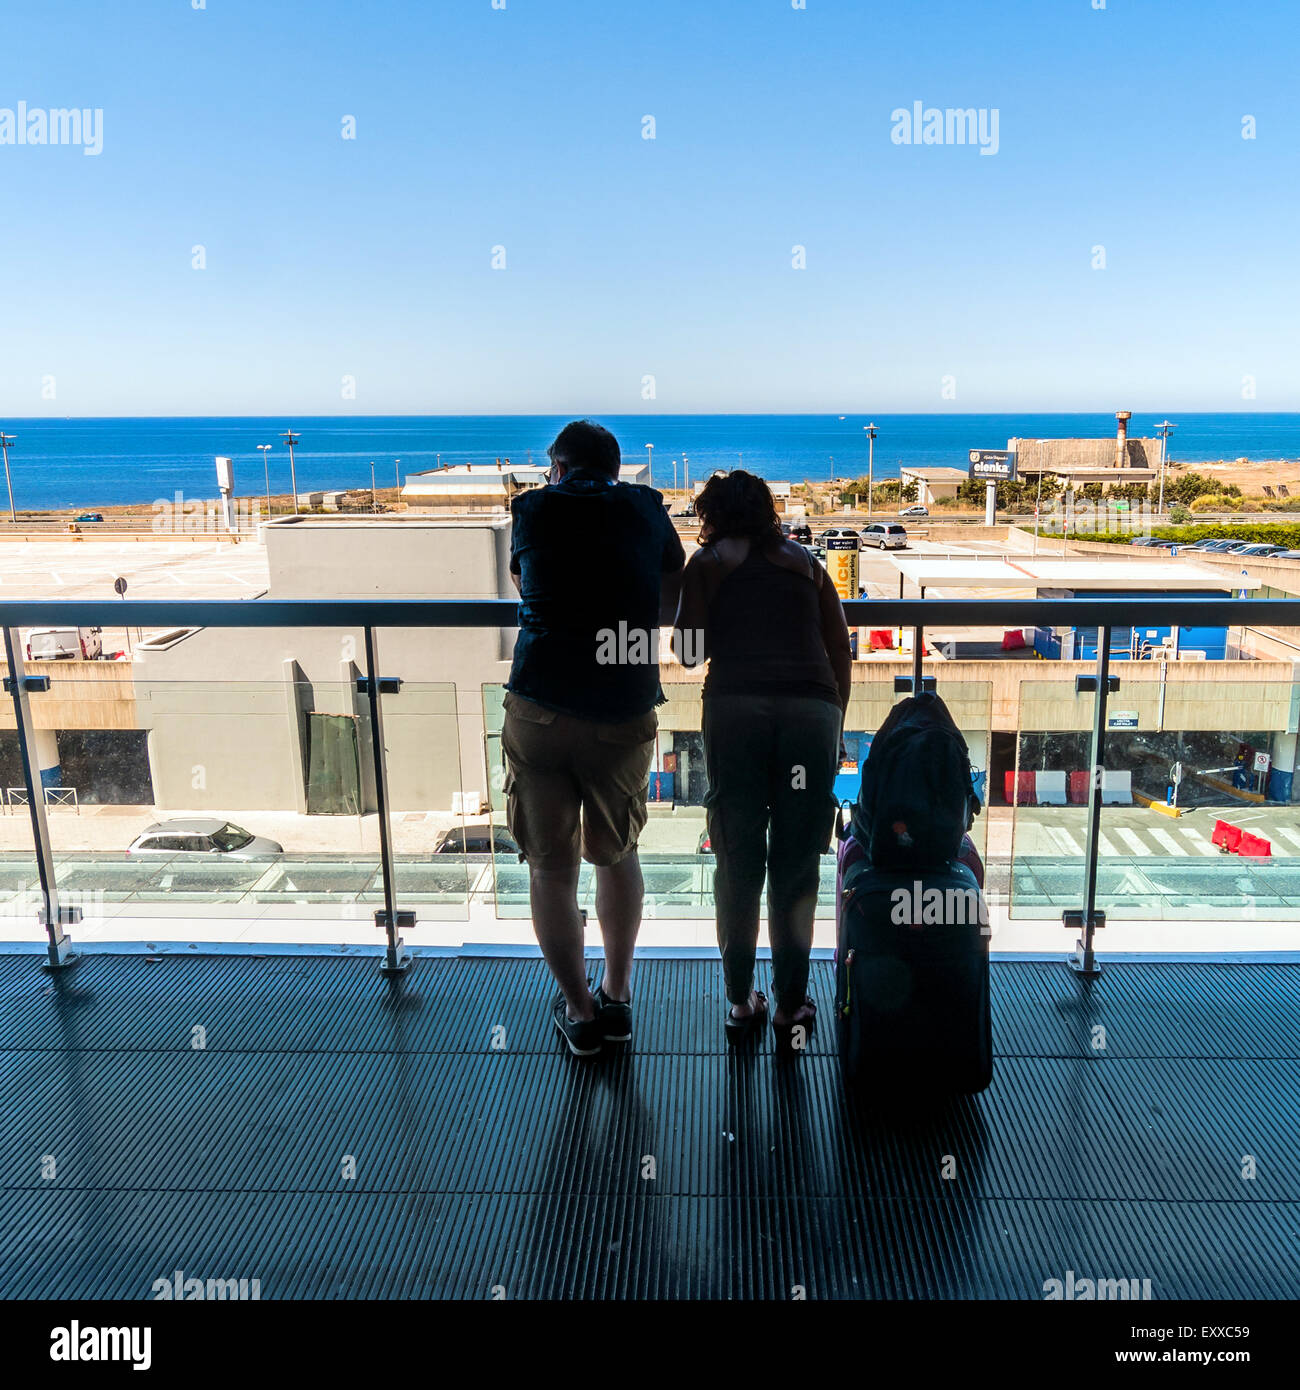 PALERMO, ITALY - AUGUST 27, 2014: passengers wait for their flights on terrace in Falcone Borsellino Airport in Palermo, Italy. Stock Photo